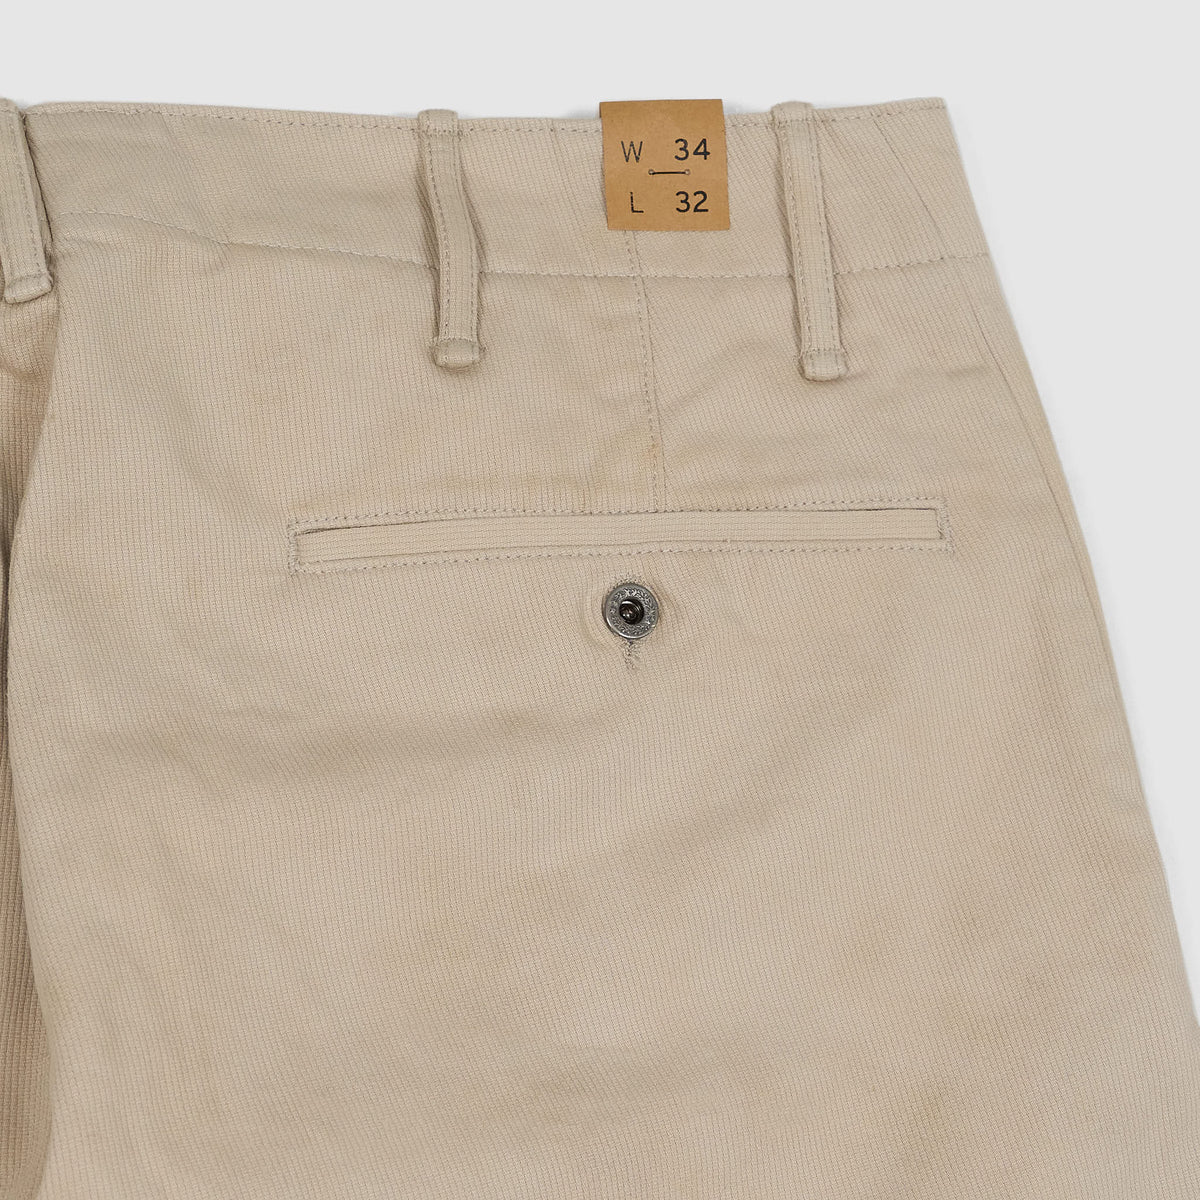 Double RL Distressed Field Flat Front Bedford Chino Pant